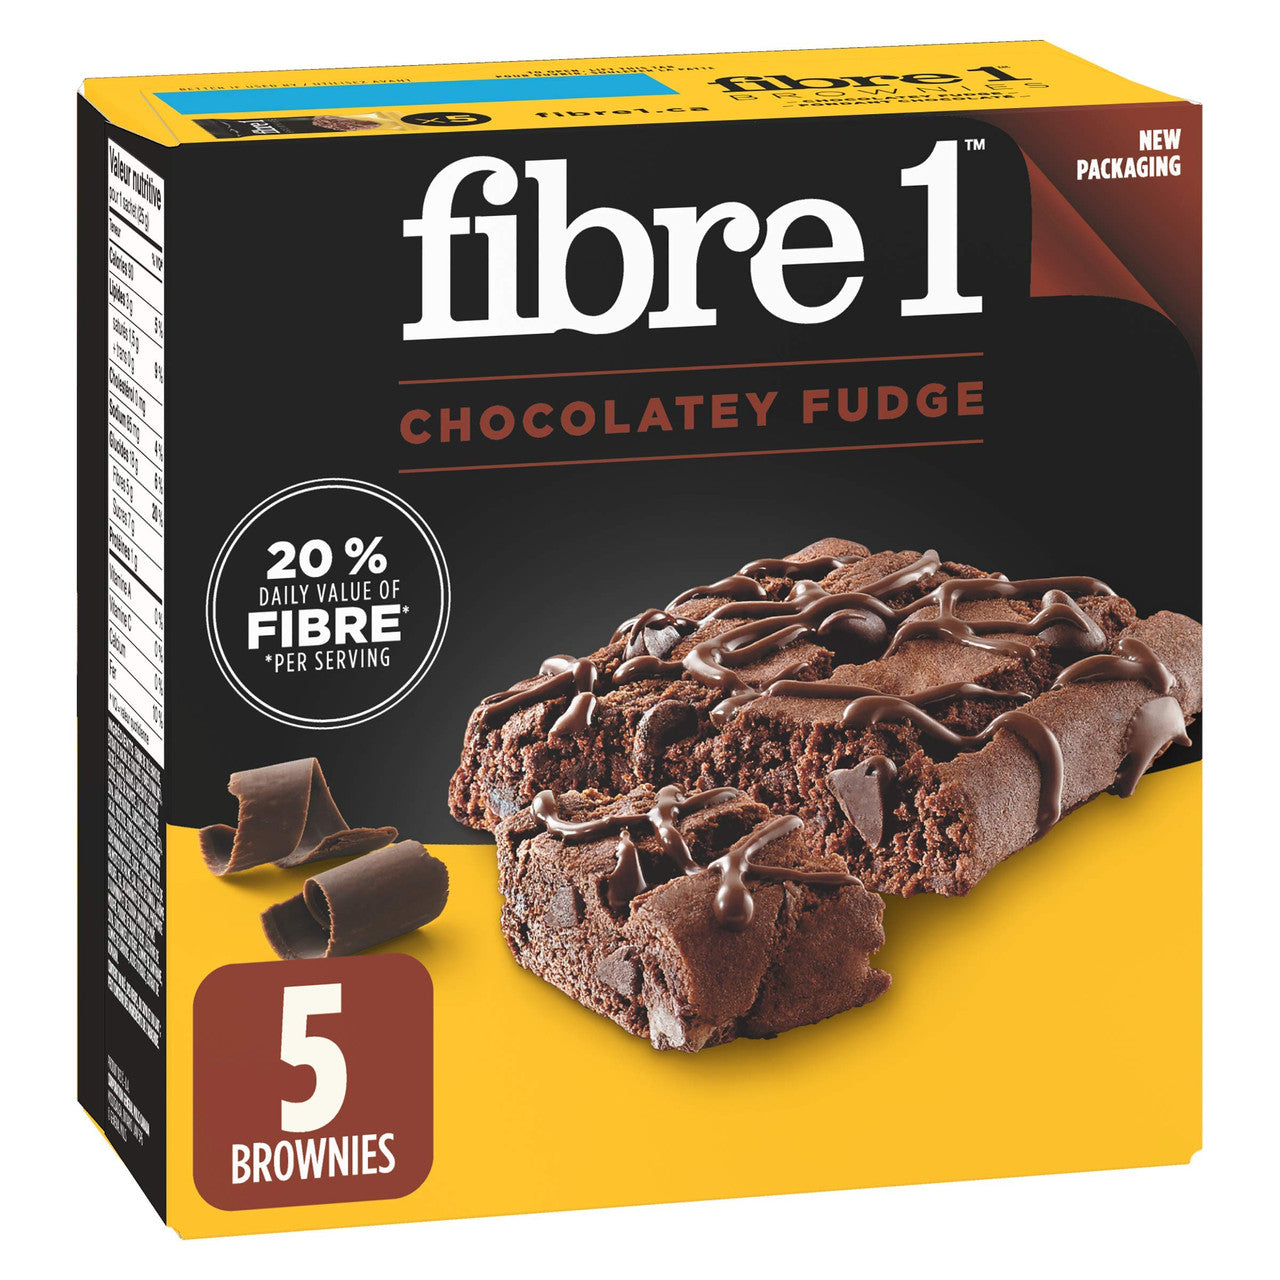 Fibre 1 Chocolatey Fudge Brownies, 5-Count, 125g/4.4oz., {Imported from Canada}